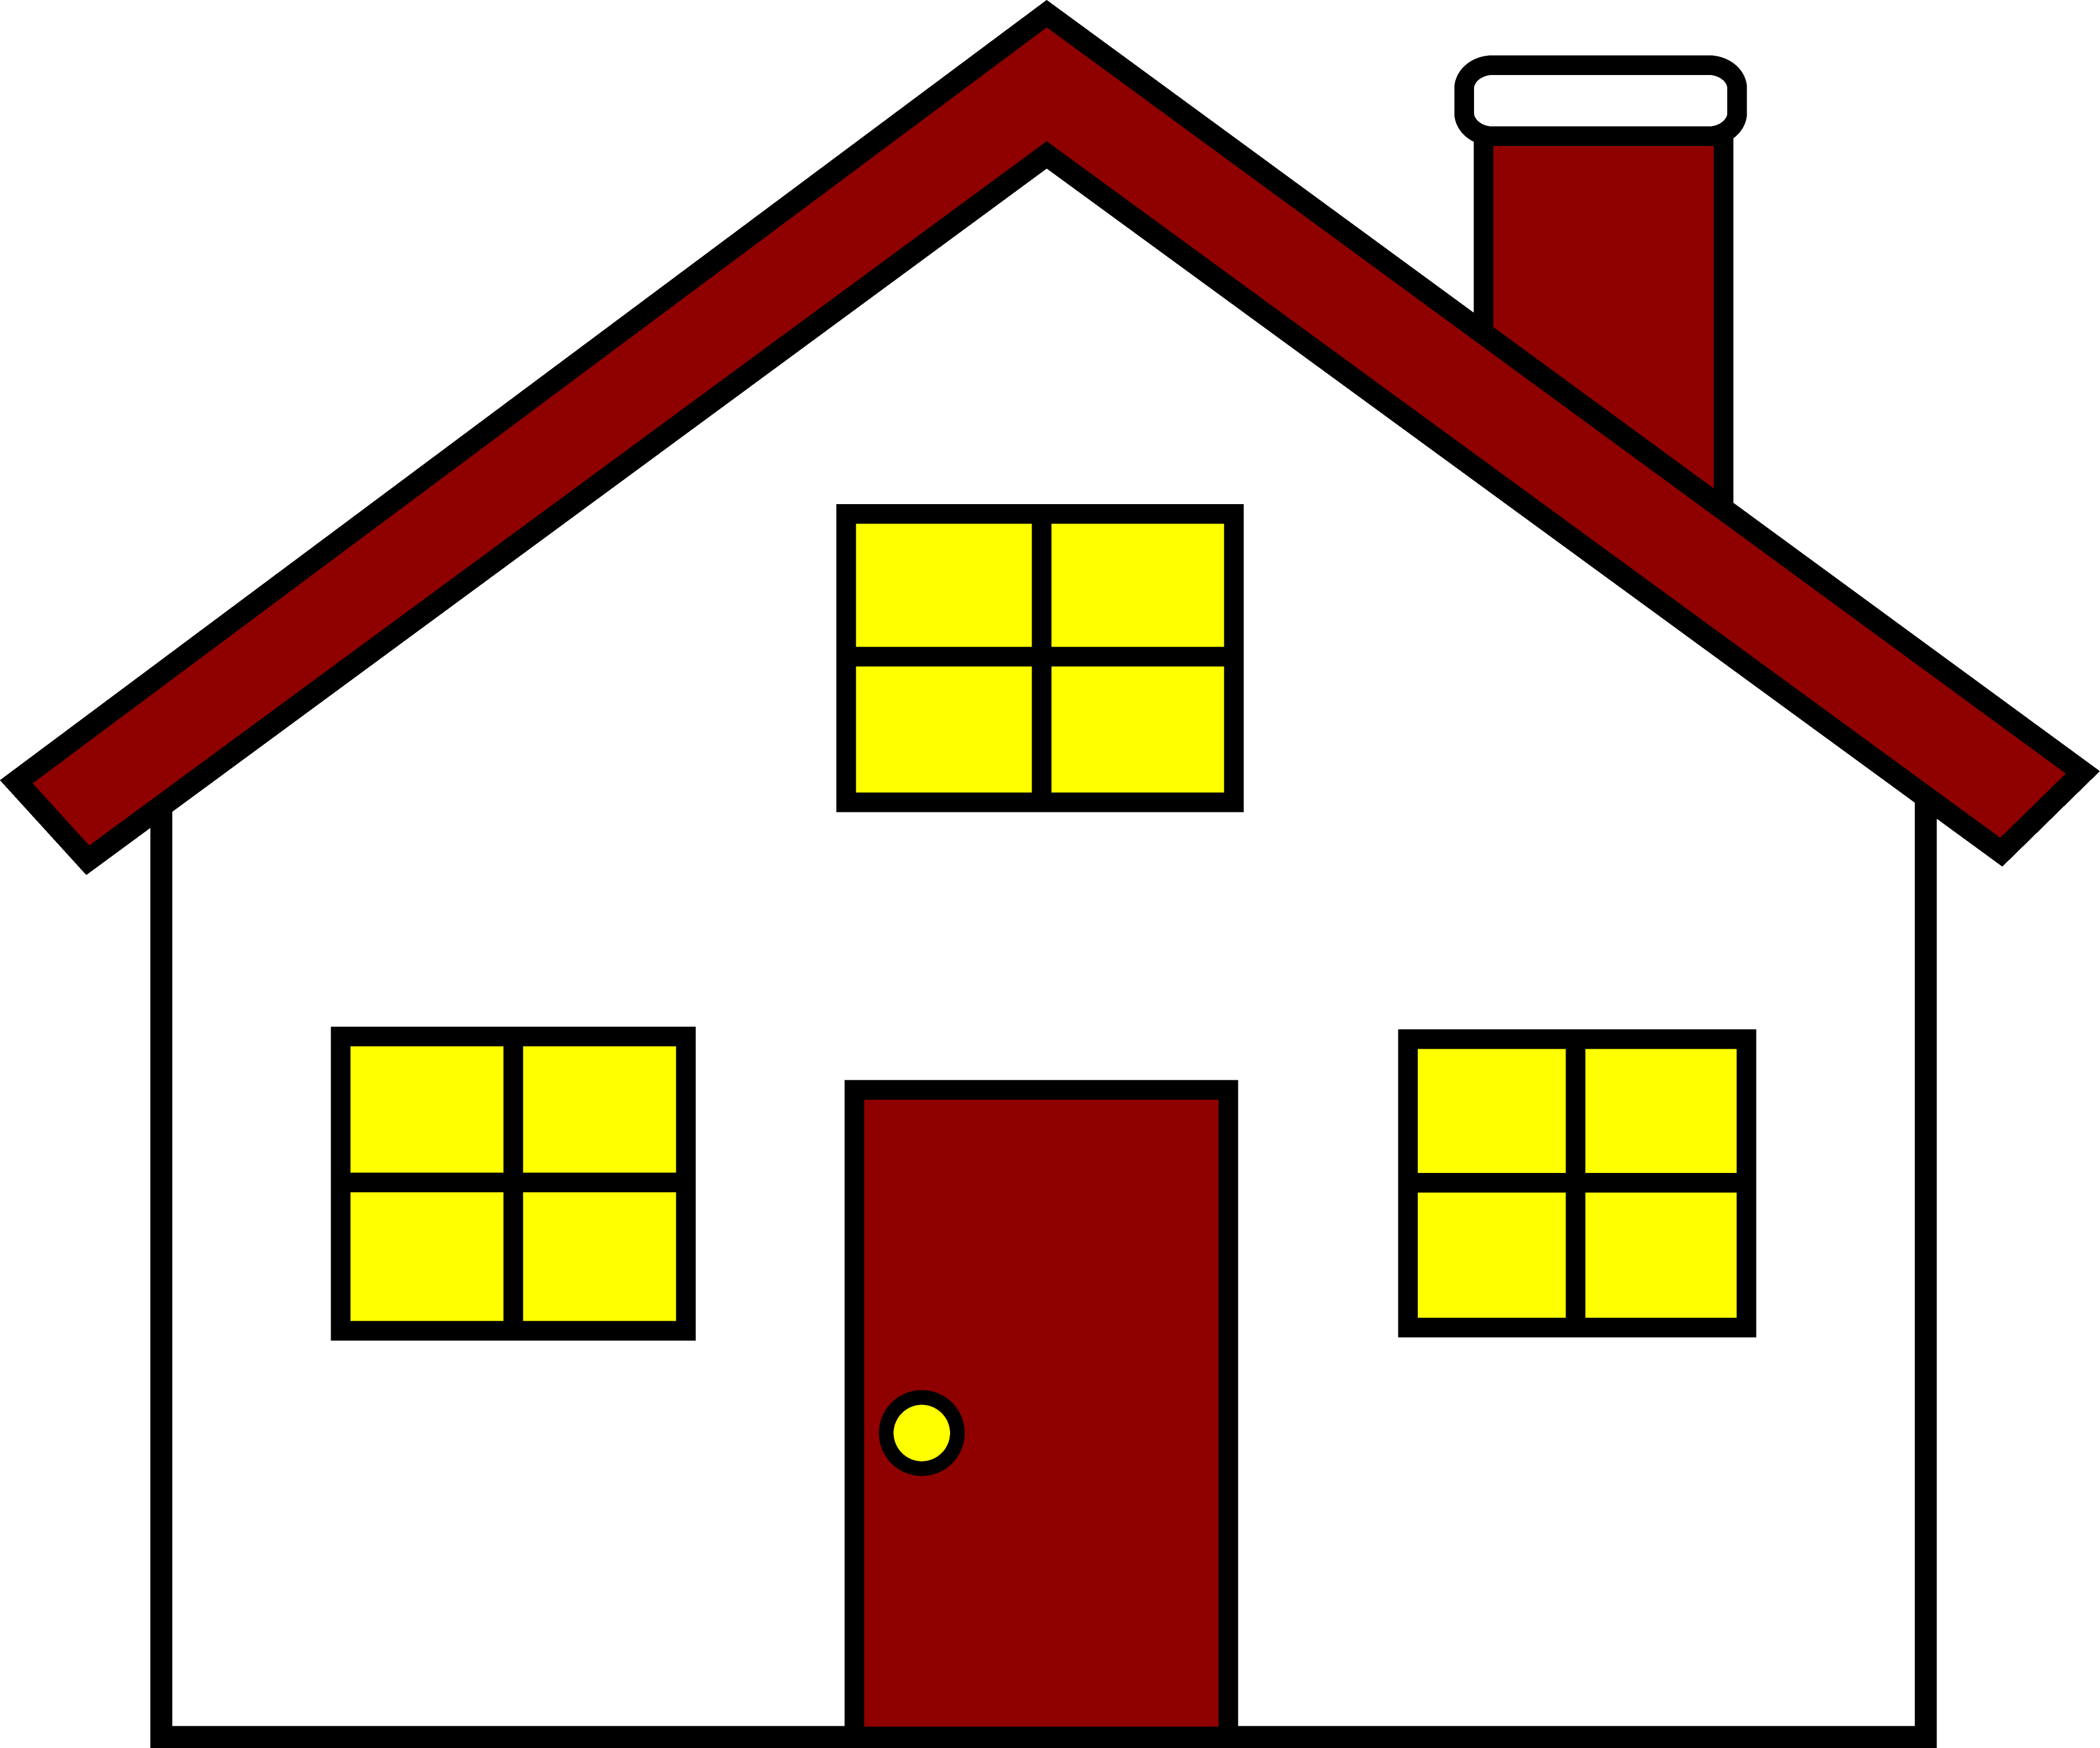 Charming Red and White House Image Clipart